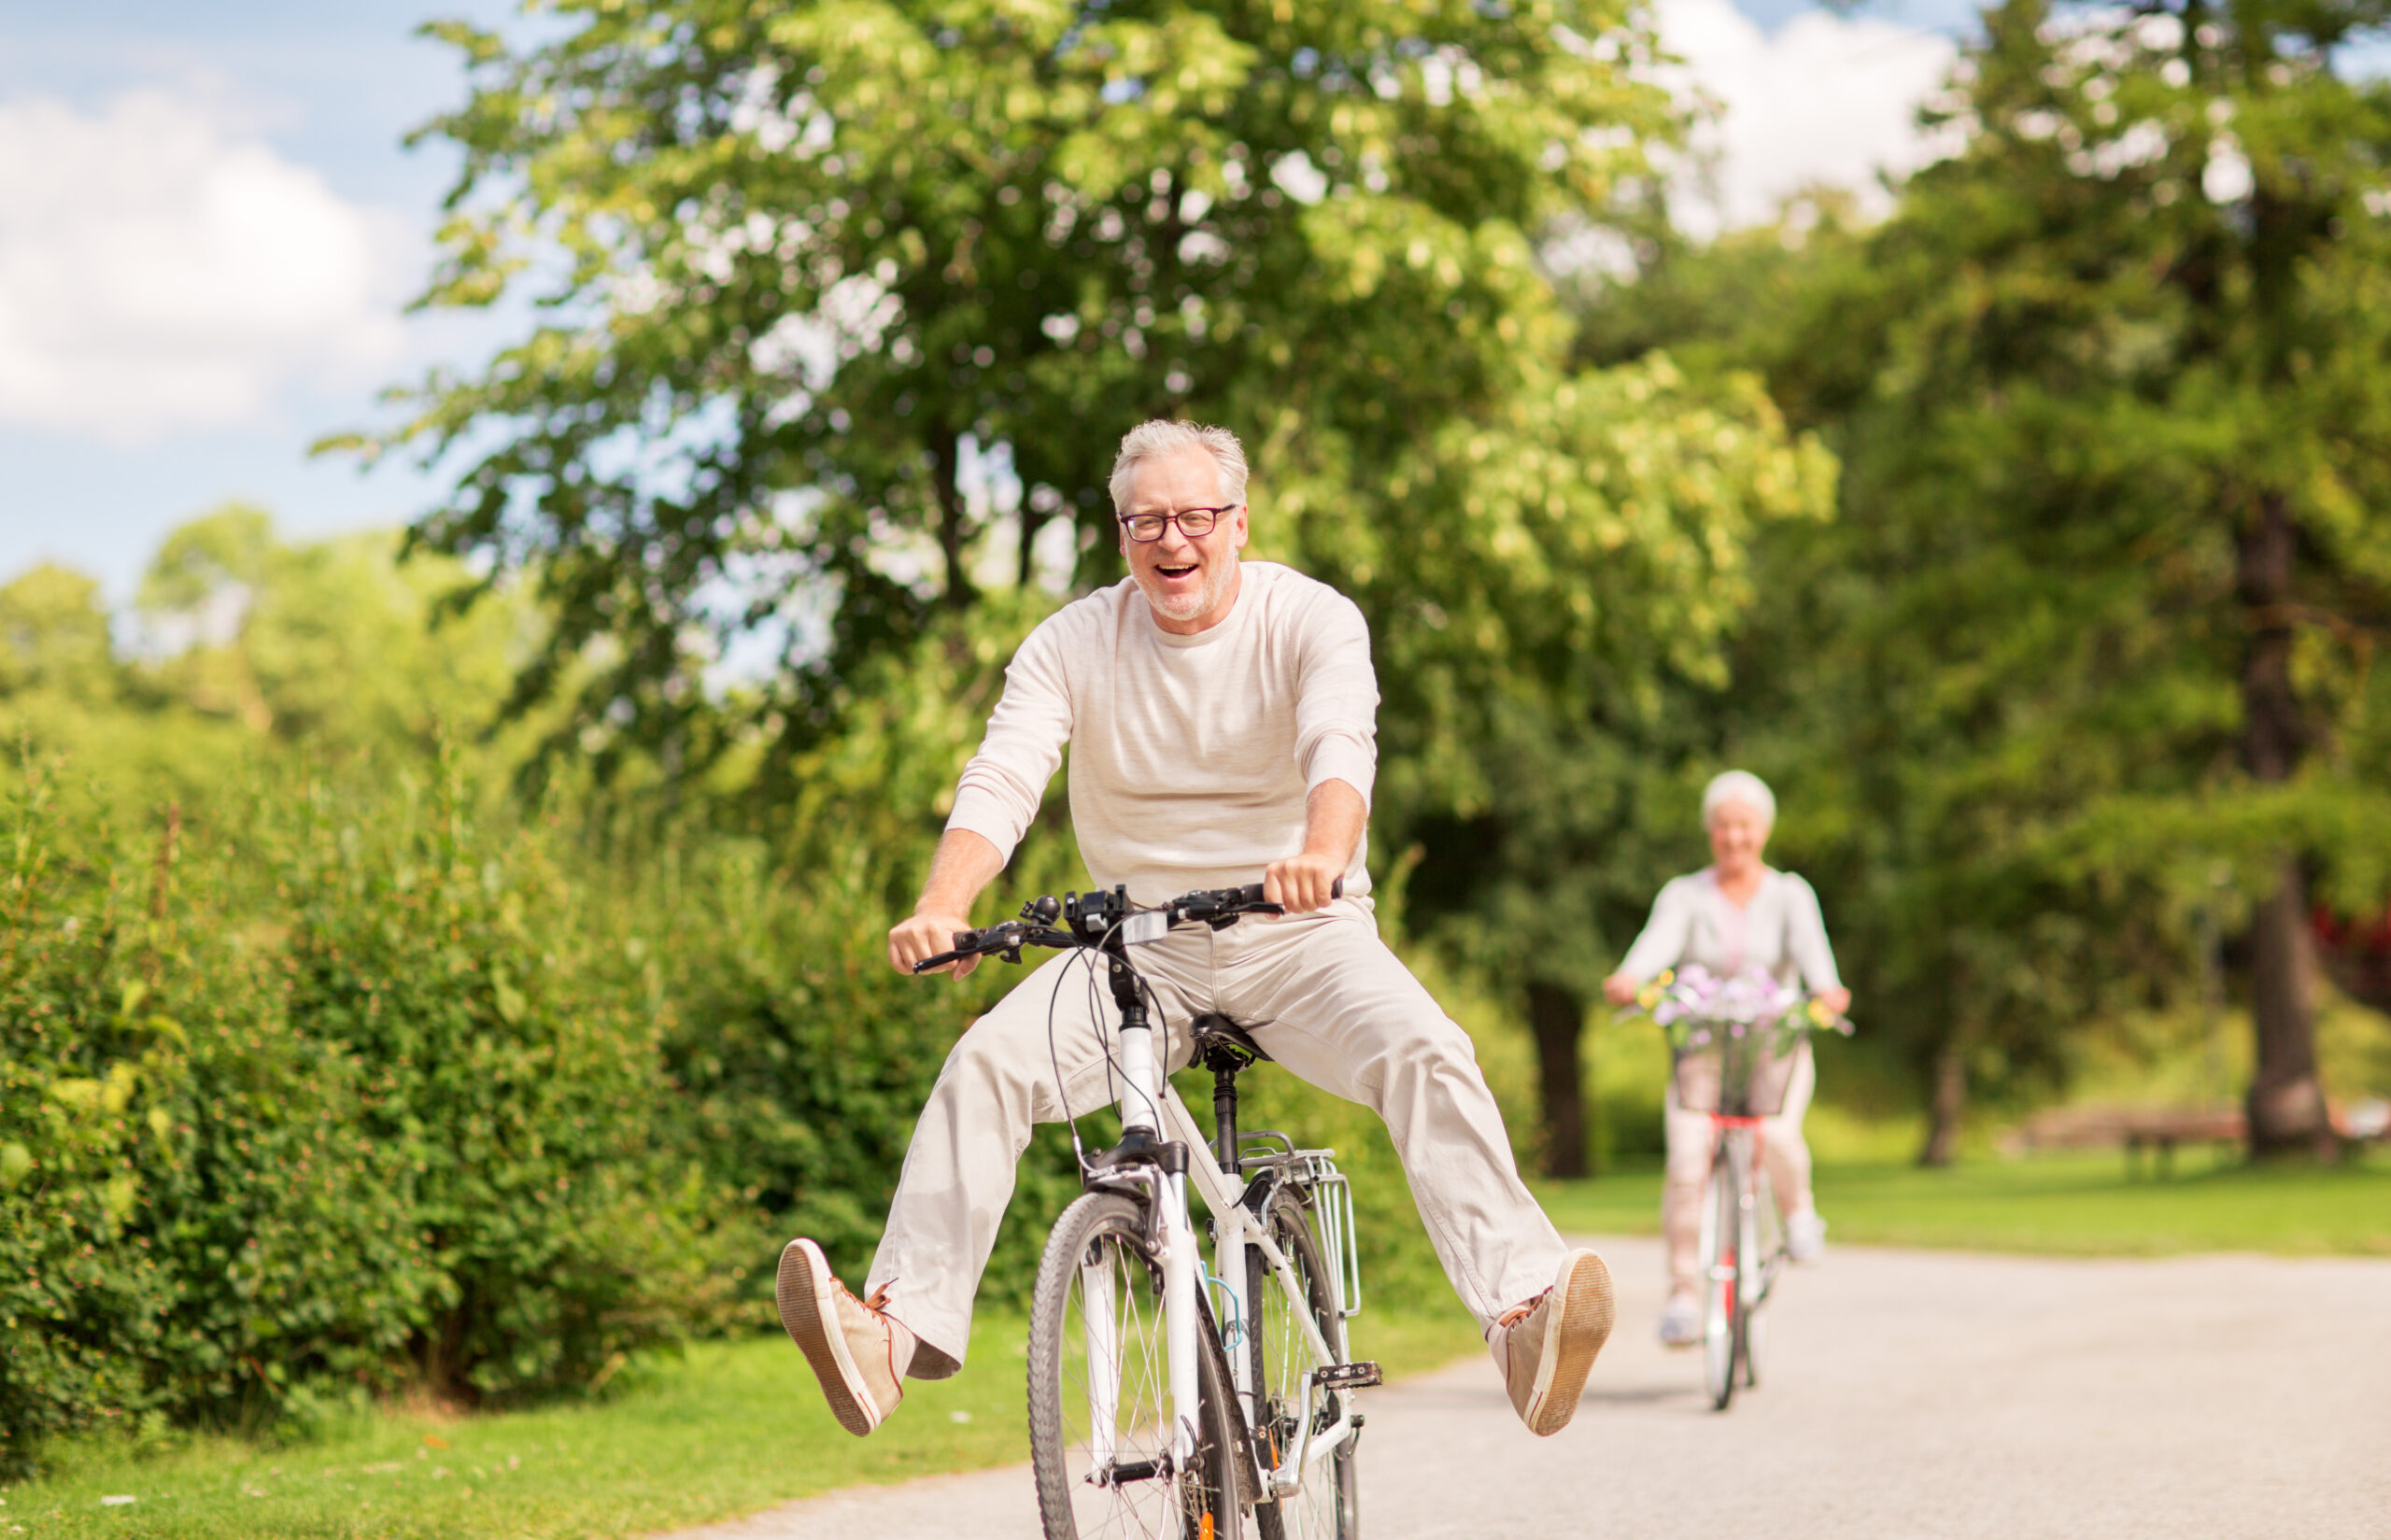 Maintaining Good Health While Transitioning into Retirement